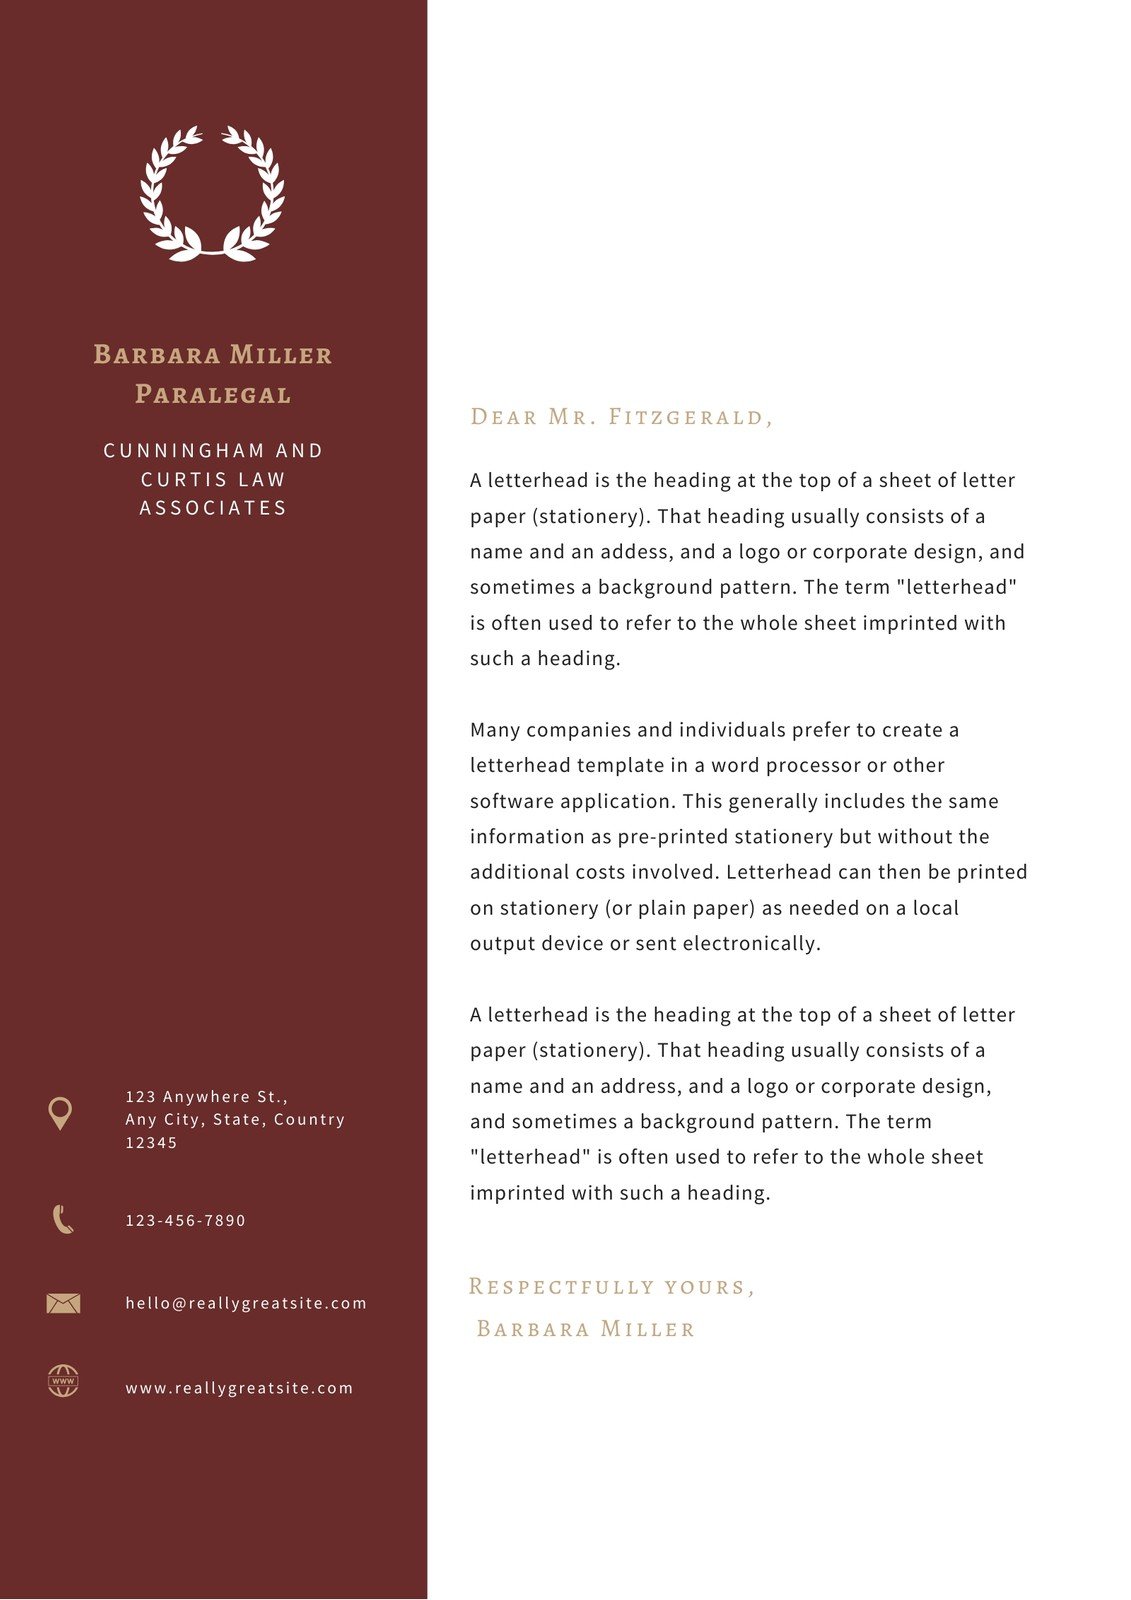 Customize 20+ Law Firm Letterheads Templates Online - Canva In Law Office Letterhead Template Free